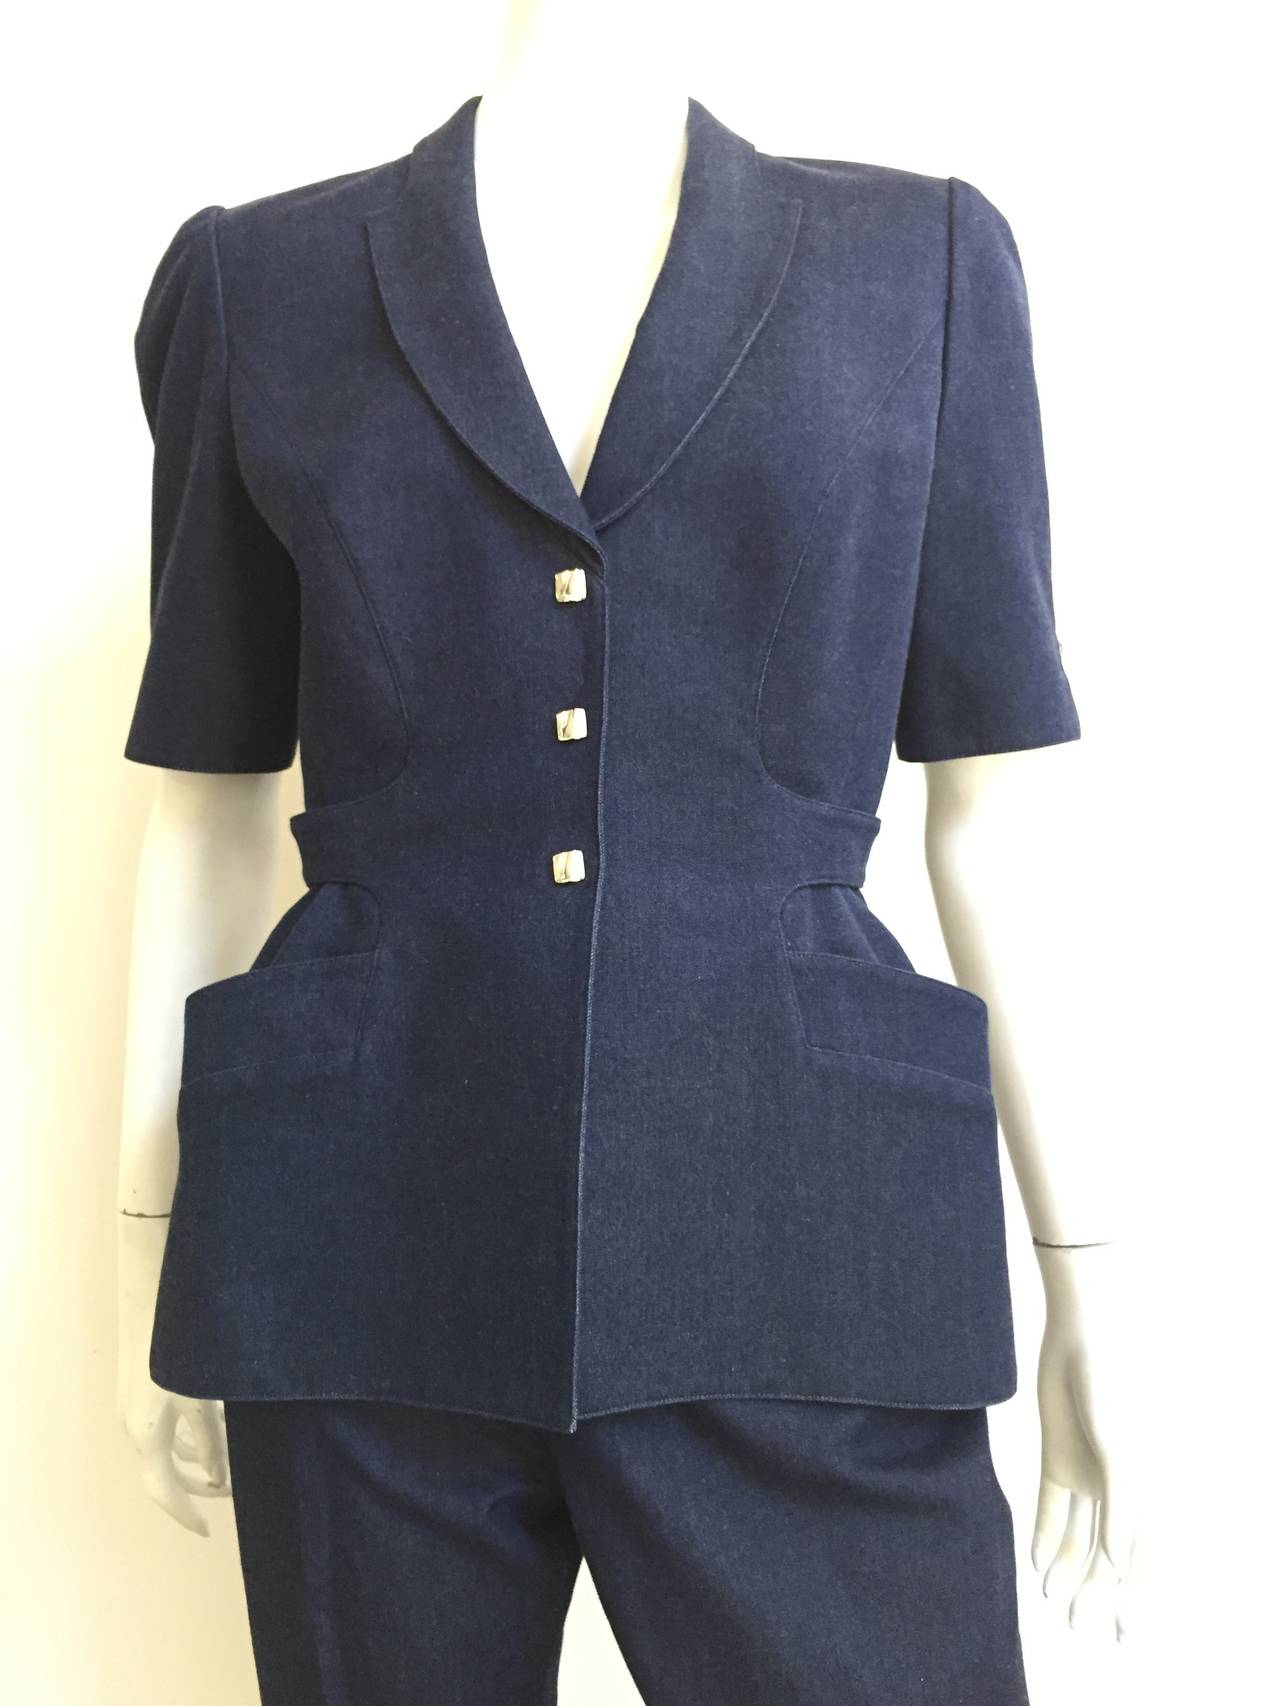 Thierry Mugler 1980s navy denim cotton jacket with pedal pushers suit is a French size 42 but fits like a modern USA size 8.  Please see & use the measurements below so you can measure your bust & waist to make sure this FAB suit will fit